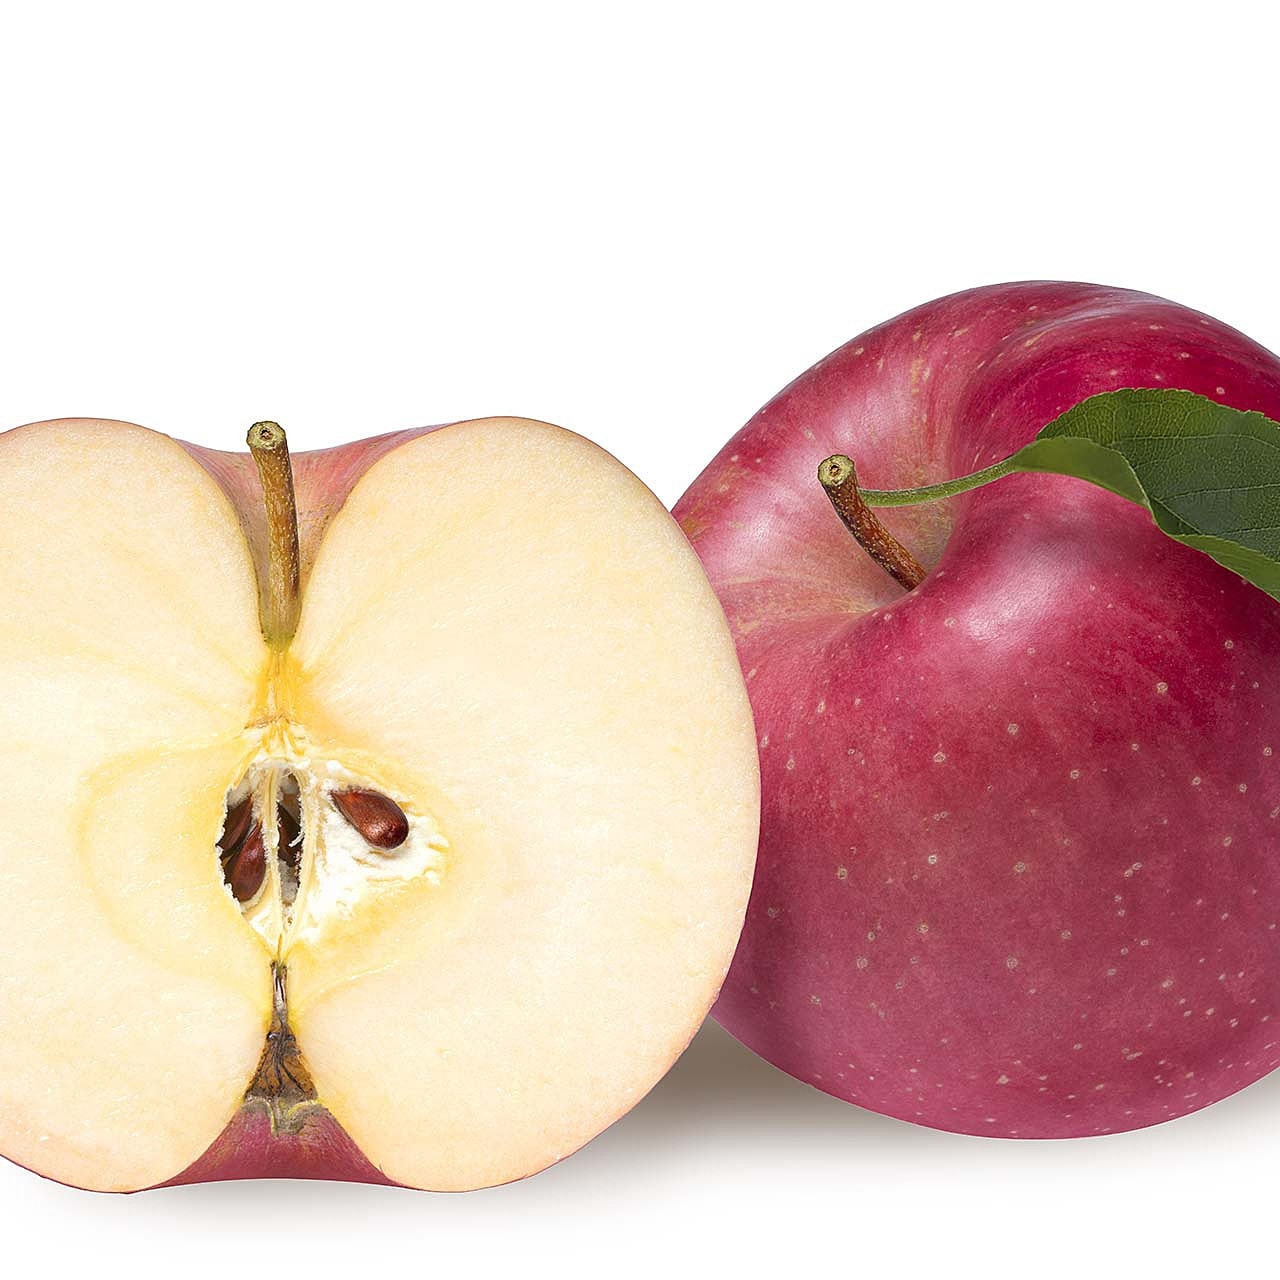 Fuji Vs Gala Apples: How Are They Different? - Tidbits Of Experience